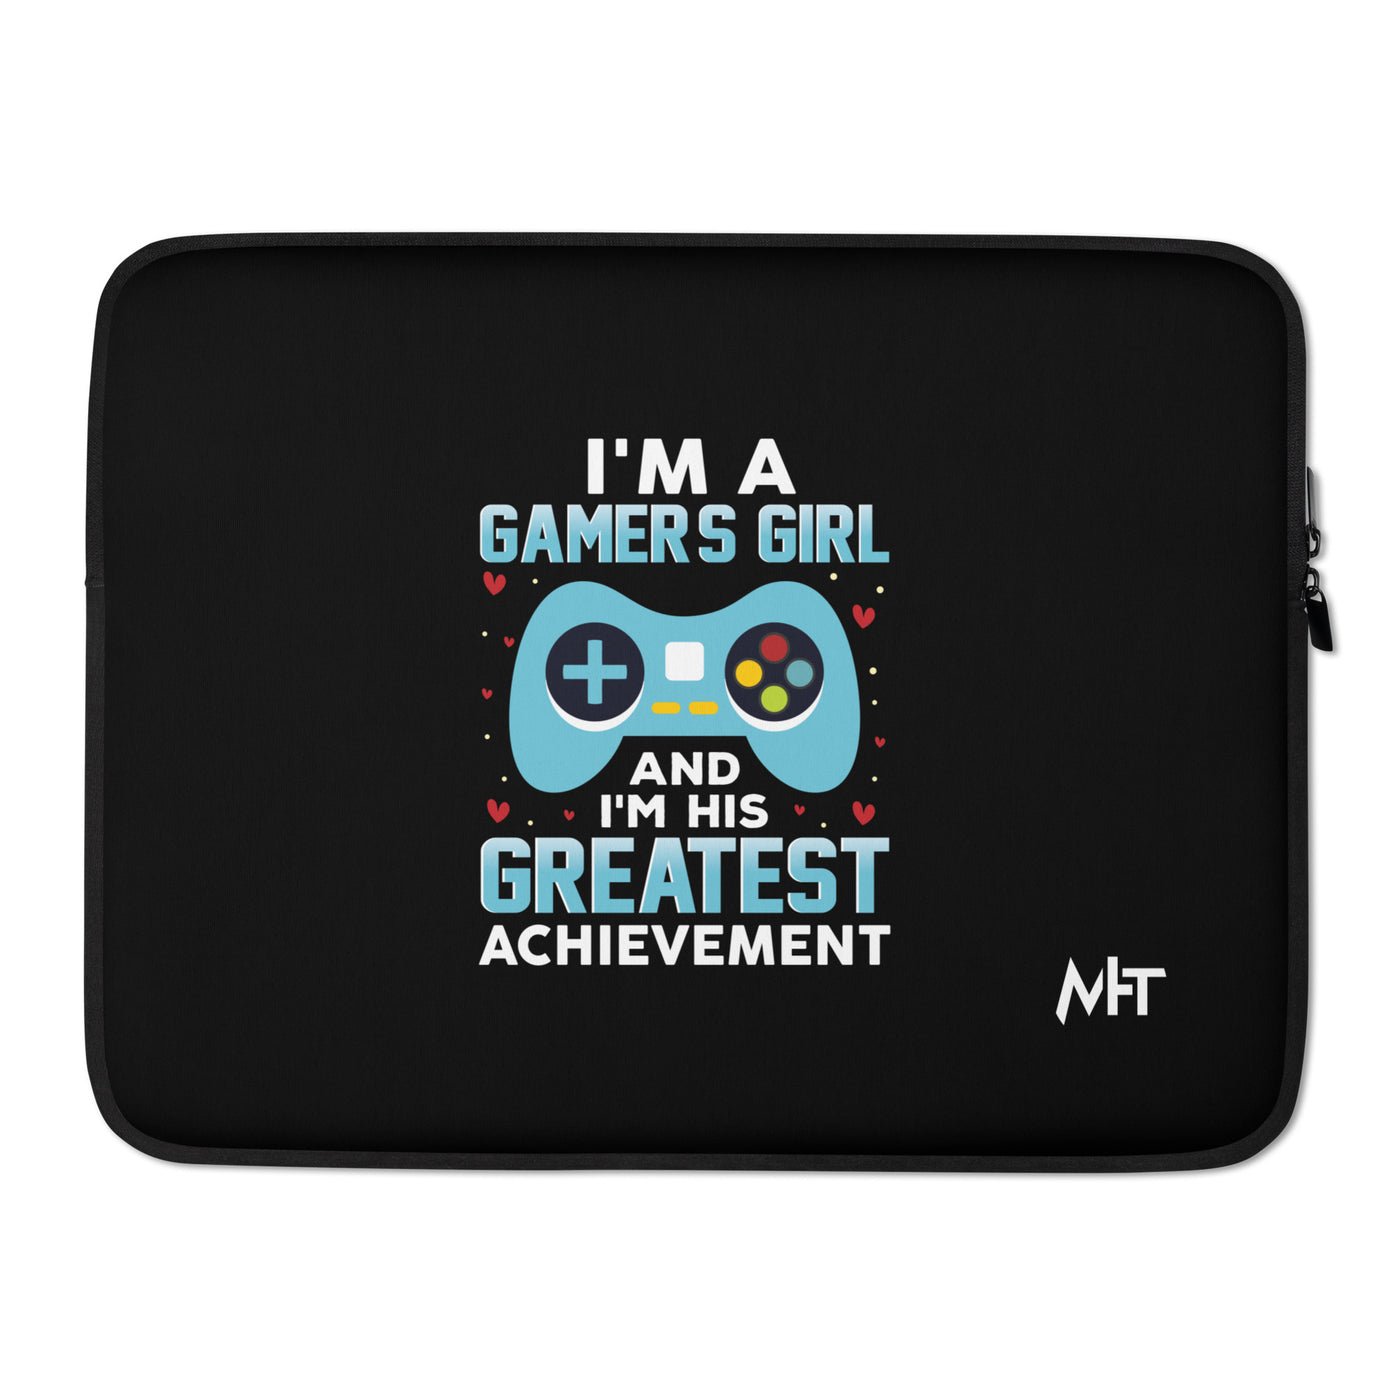 I am a Gamer's Girl, I am his Greatest Achievement (turquoise text ) - Laptop Sleeve